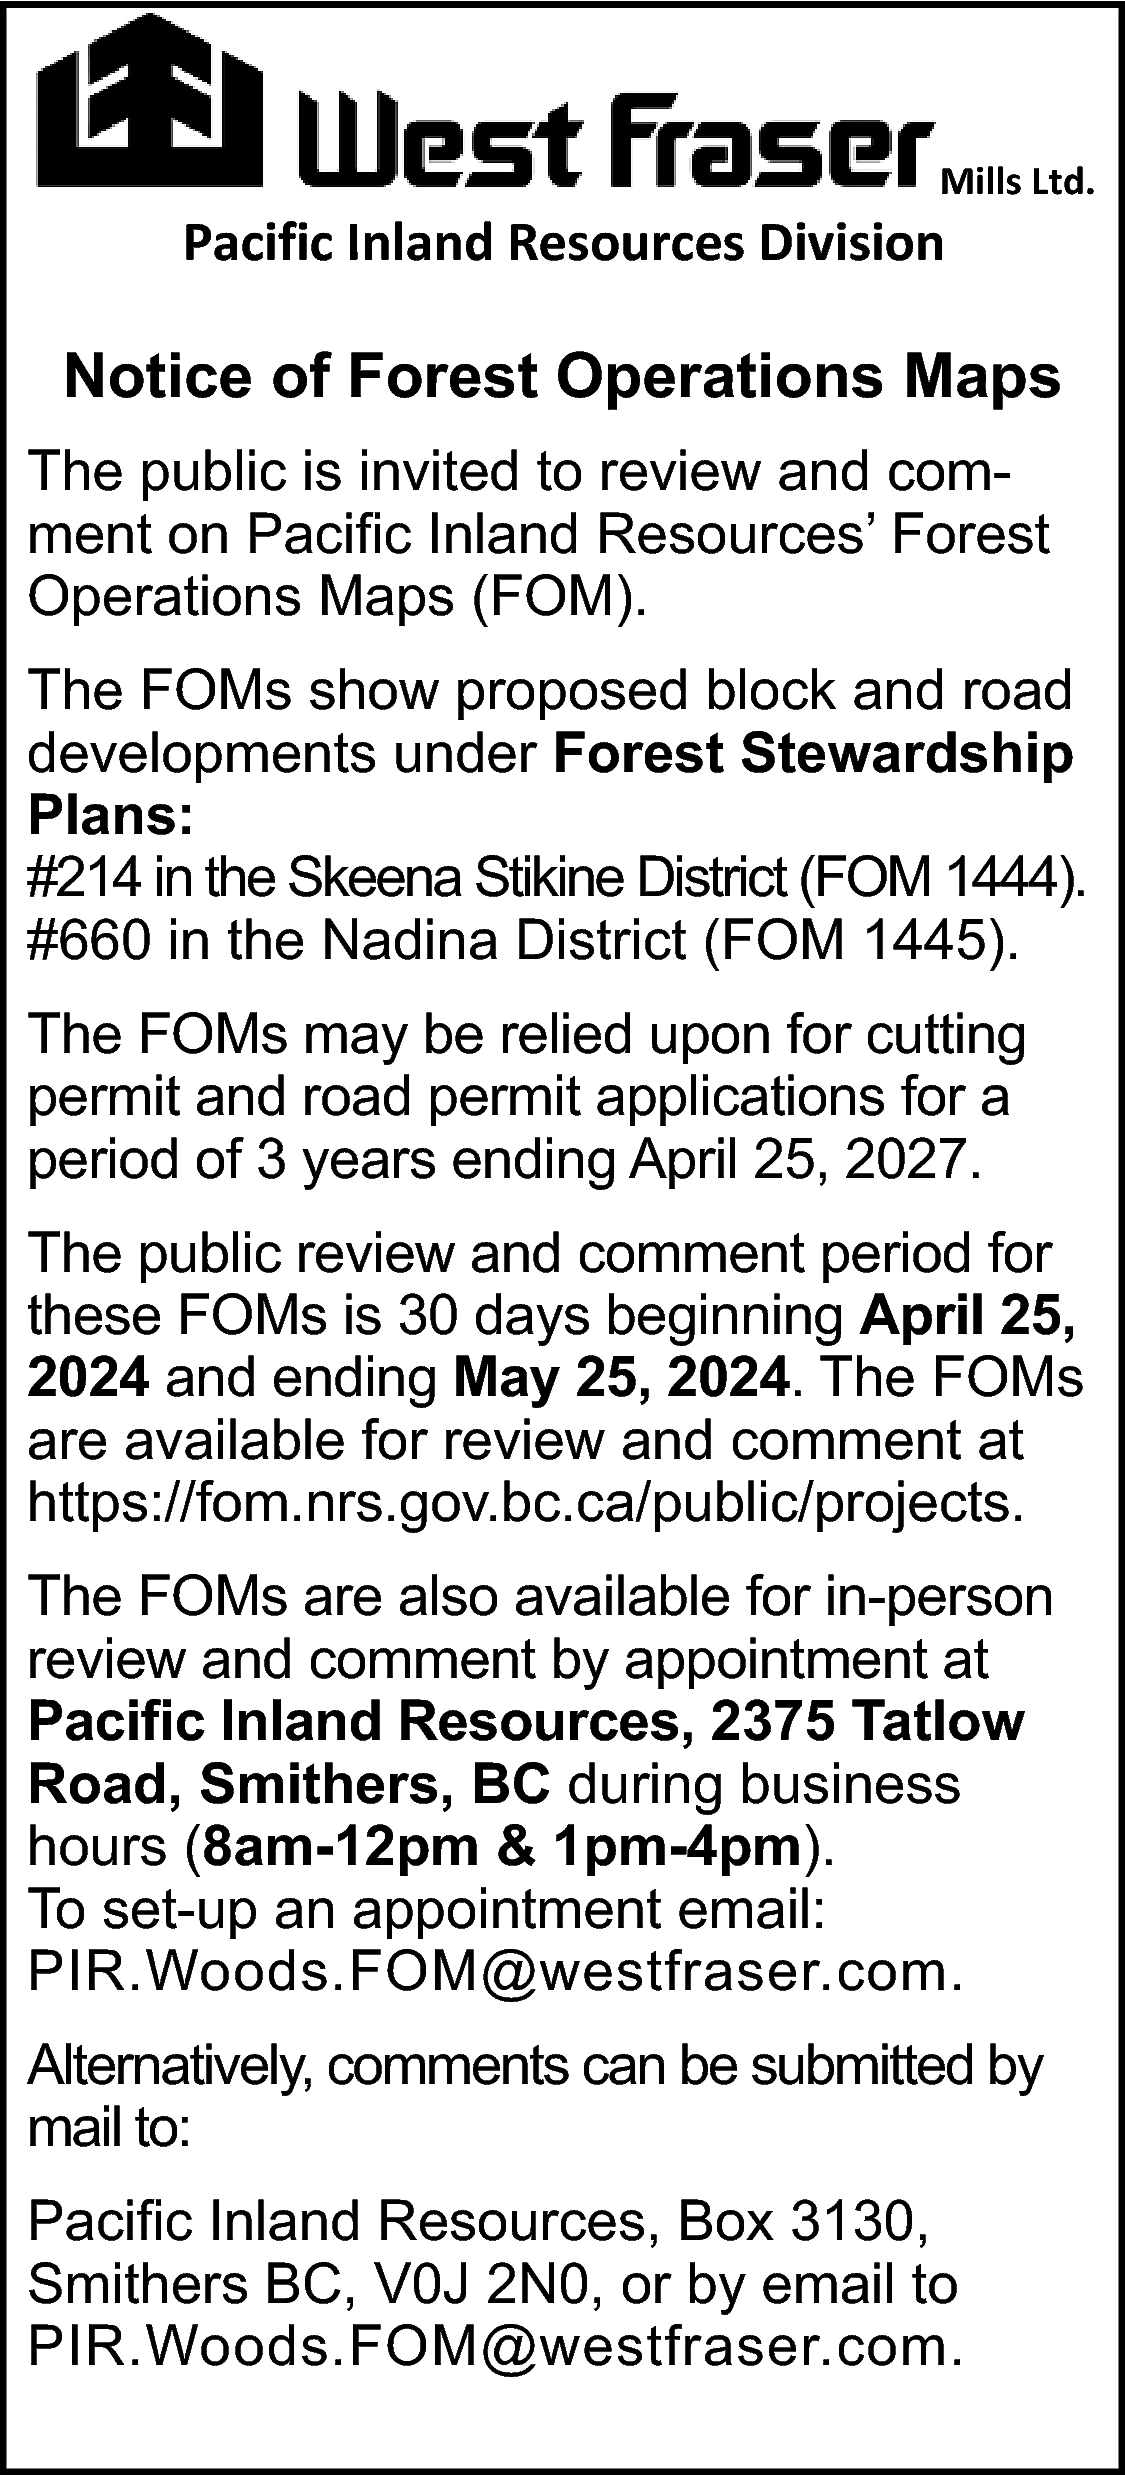 Mills Ltd. <br> <br>Pacific Inland  Mills Ltd.    Pacific Inland Resources Division    Notice of Forest Operations Maps  The public is invited to review and comment on Pacific Inland Resources’ Forest  Operations Maps (FOM).  The FOMs show proposed block and road  developments under Forest Stewardship  Plans:  #214 in the Skeena Stikine District (FOM 1444).  #660 in the Nadina District (FOM 1445).  The FOMs may be relied upon for cutting  permit and road permit applications for a  period of 3 years ending April 25, 2027.  The public review and comment period for  these FOMs is 30 days beginning April 25,  2024 and ending May 25, 2024. The FOMs  are available for review and comment at  https://fom.nrs.gov.bc.ca/public/projects.  The FOMs are also available for in-person  review and comment by appointment at  Pacific Inland Resources, 2375 Tatlow  Road, Smithers, BC during business  hours (8am-12pm & 1pm-4pm).  To set-up an appointment email:  PIR.Woods.FOM@westfraser.com.  Alternatively, comments can be submitted by  mail to:  Pacific Inland Resources, Box 3130,  Smithers BC, V0J 2N0, or by email to  PIR.Woods.FOM@westfraser.com.    